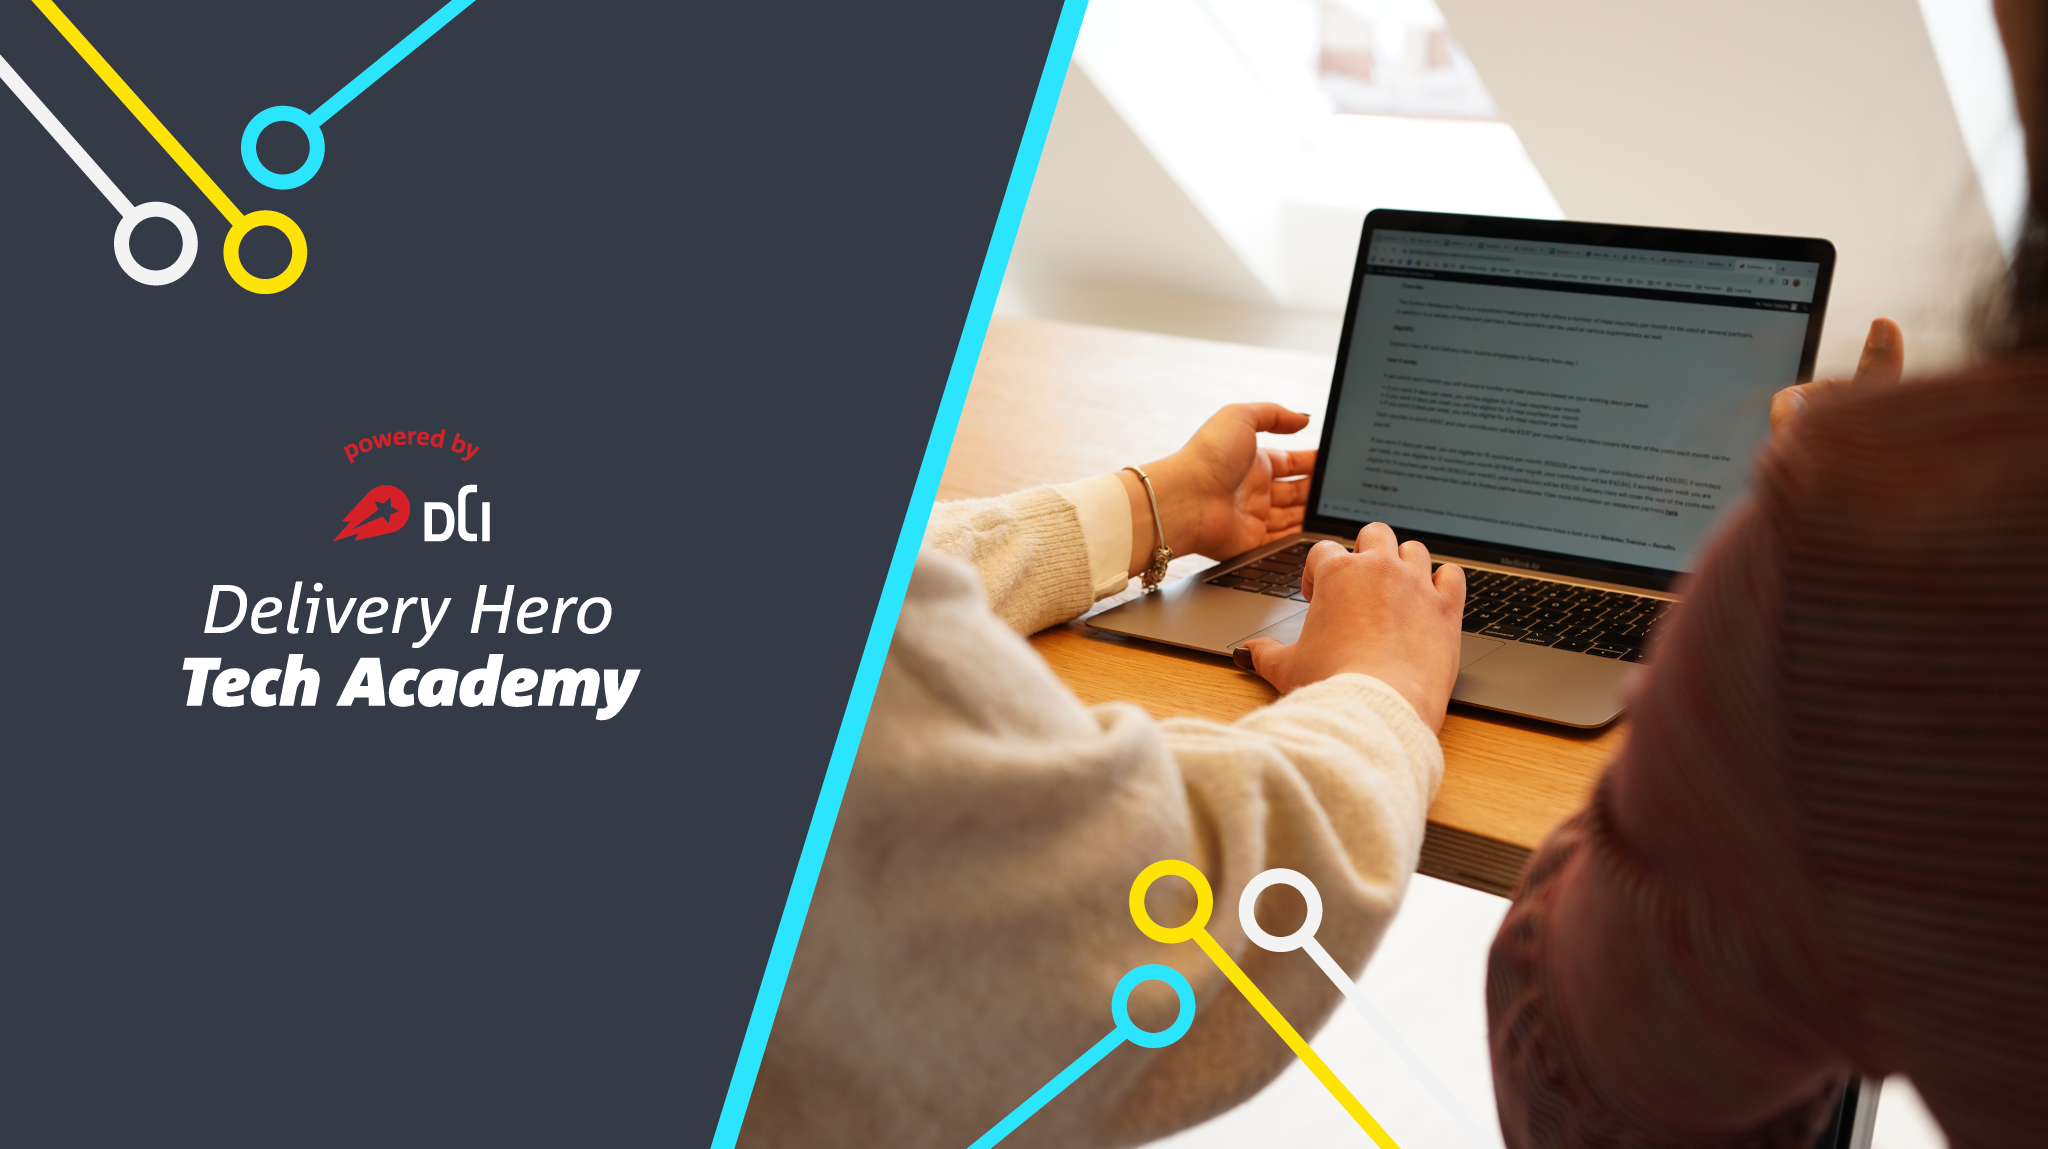 Delivery Hero Tech Academy: Completion of successful pilot